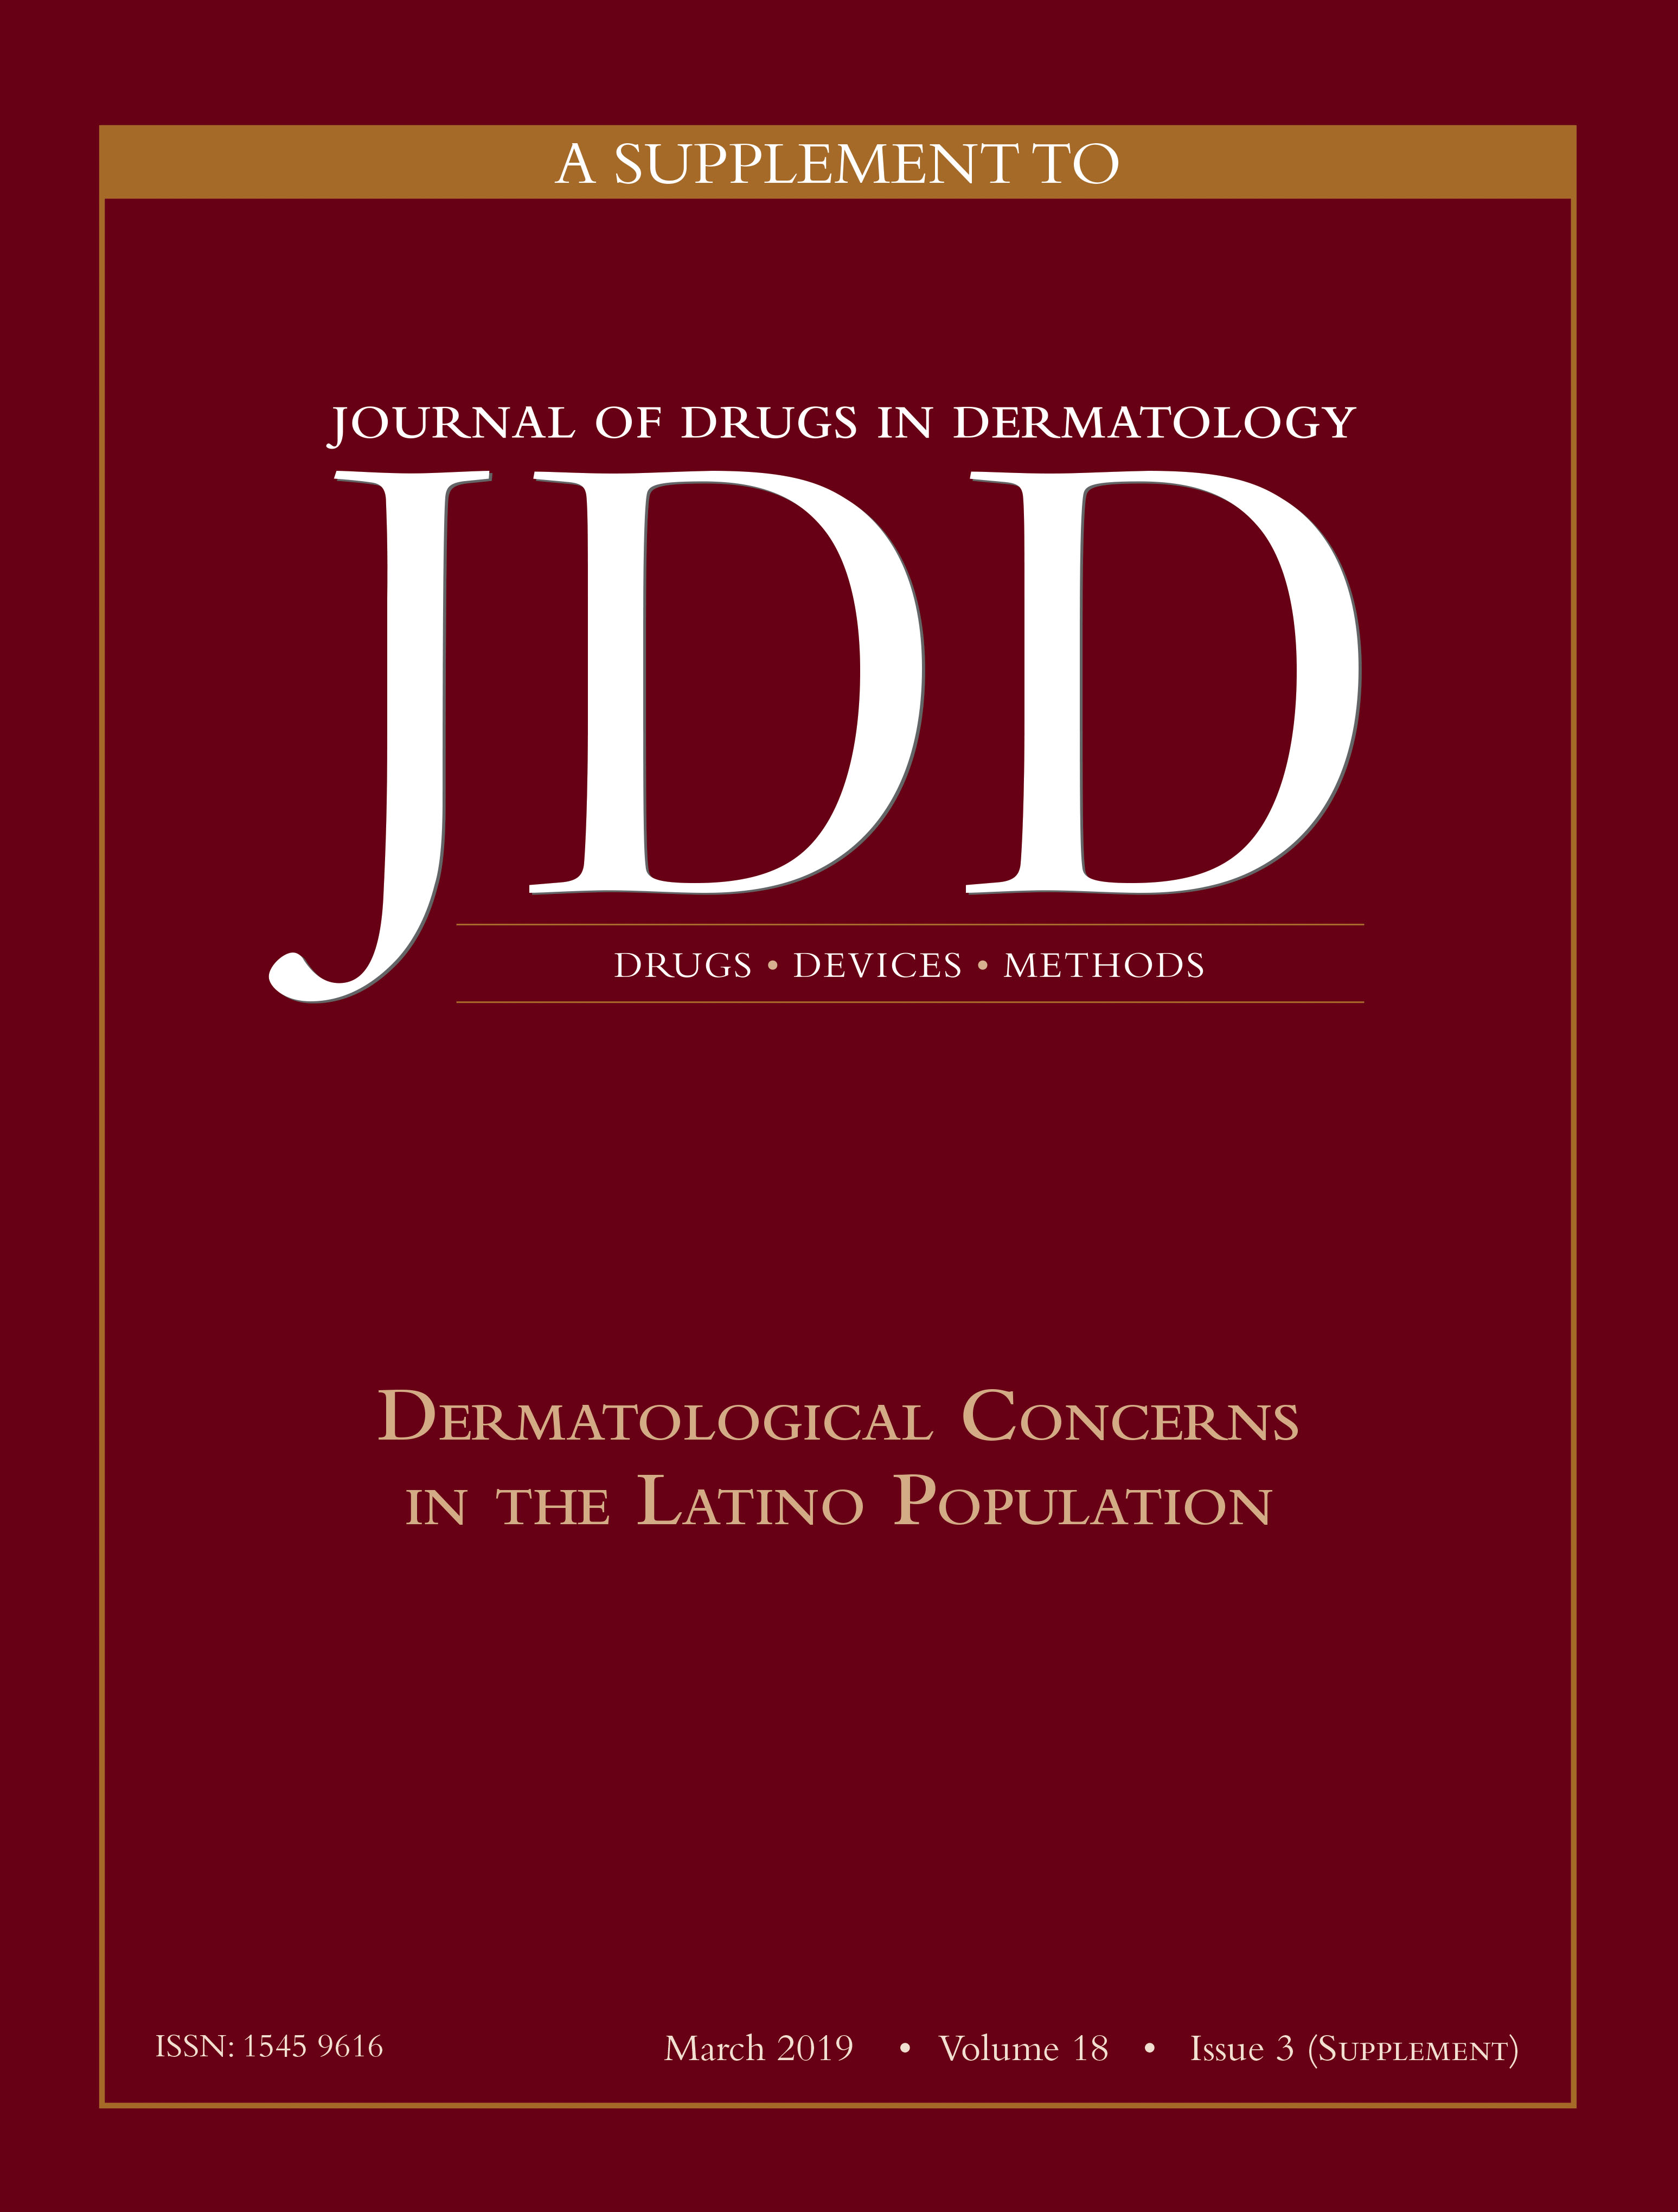 Dermatological Concerns in the Latino Population